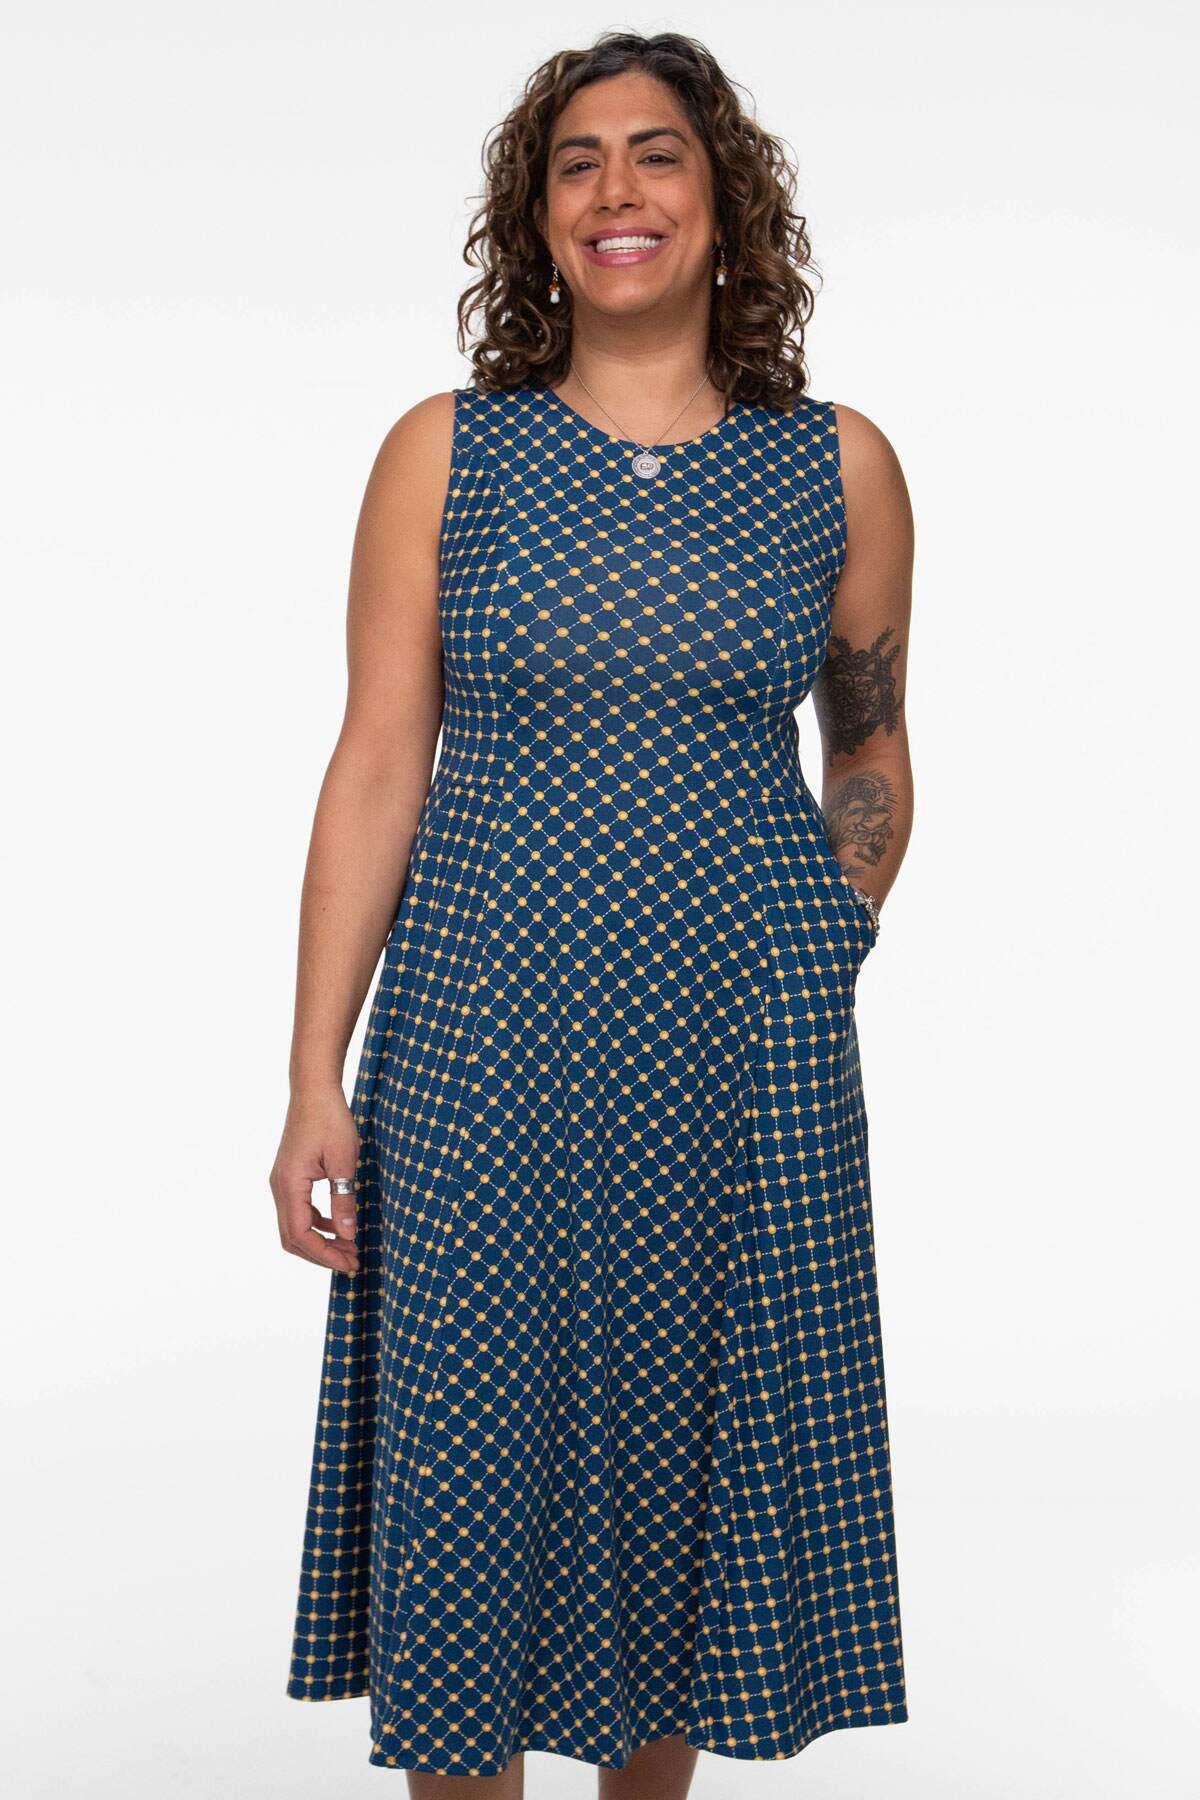 Cleo Dress - Navy with Gold Cross Dots